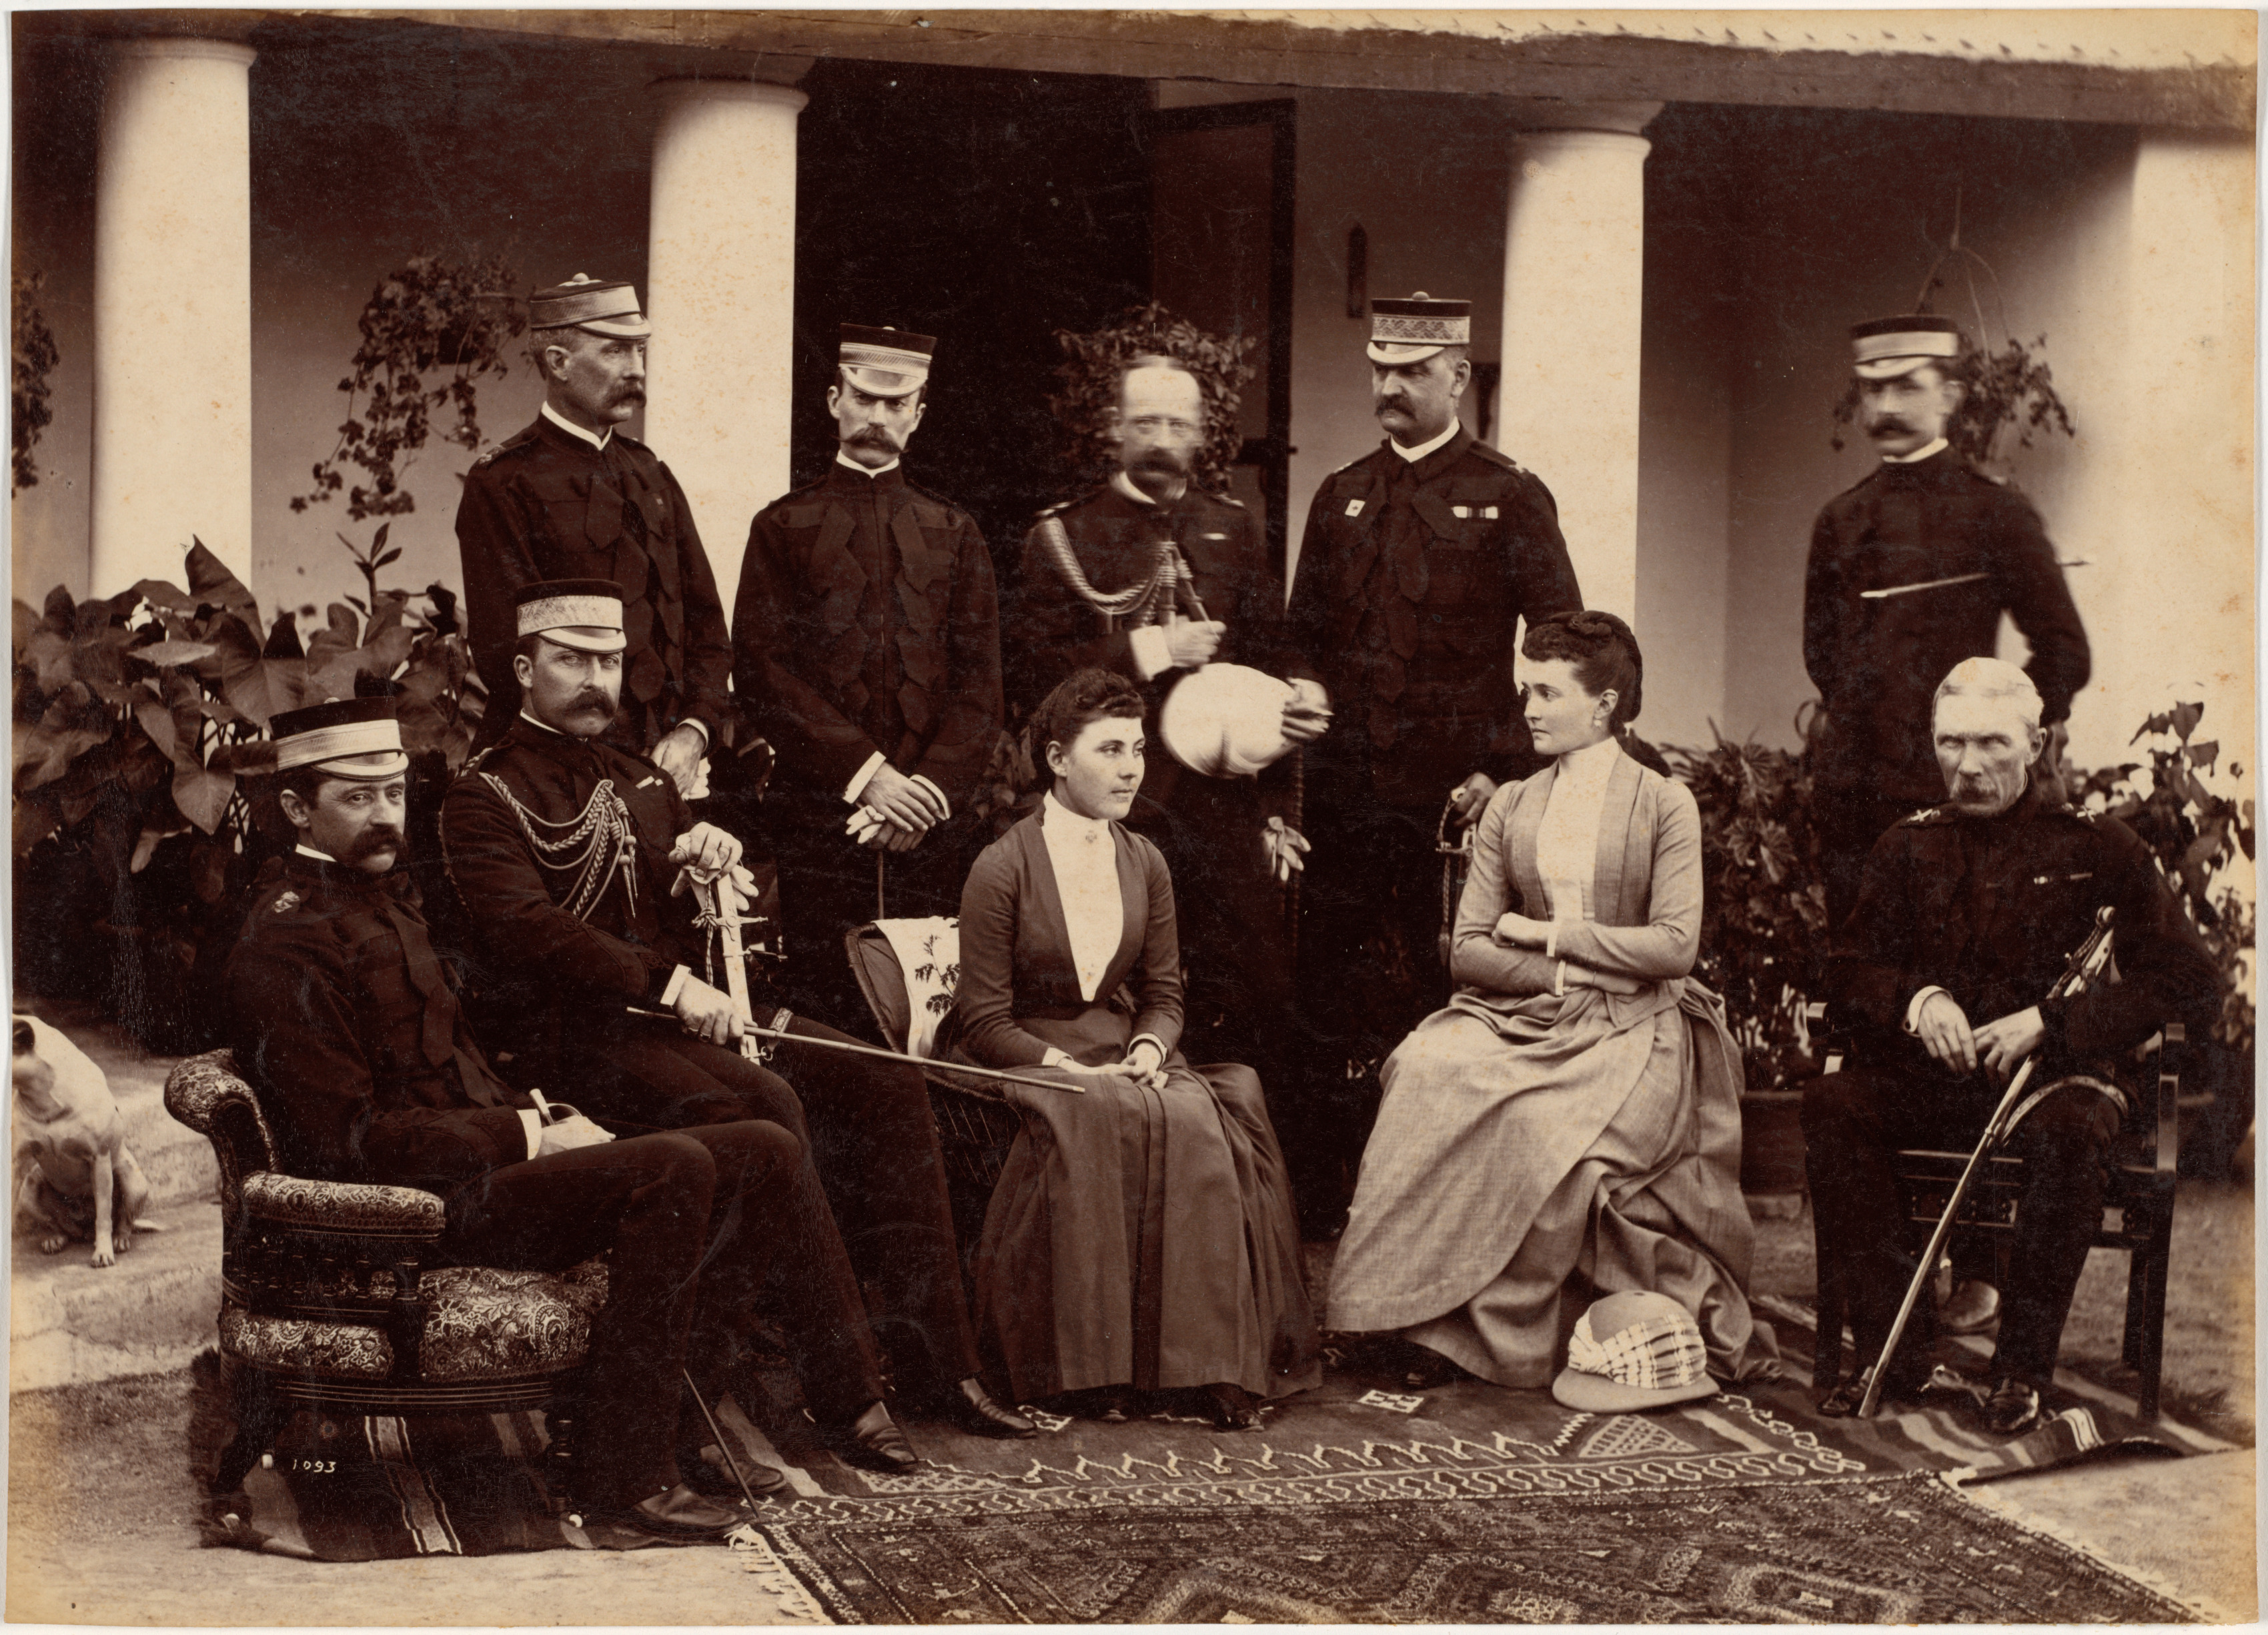 The Duke and Duchess of Connaught, with Col. Adam, Captain H.V. Benett, Col. Becher, Gen. Knowles, Captain Herbert, Col. Cavaye, Mrs. Cavaye, and Gen. R. Gellispie, Mhow